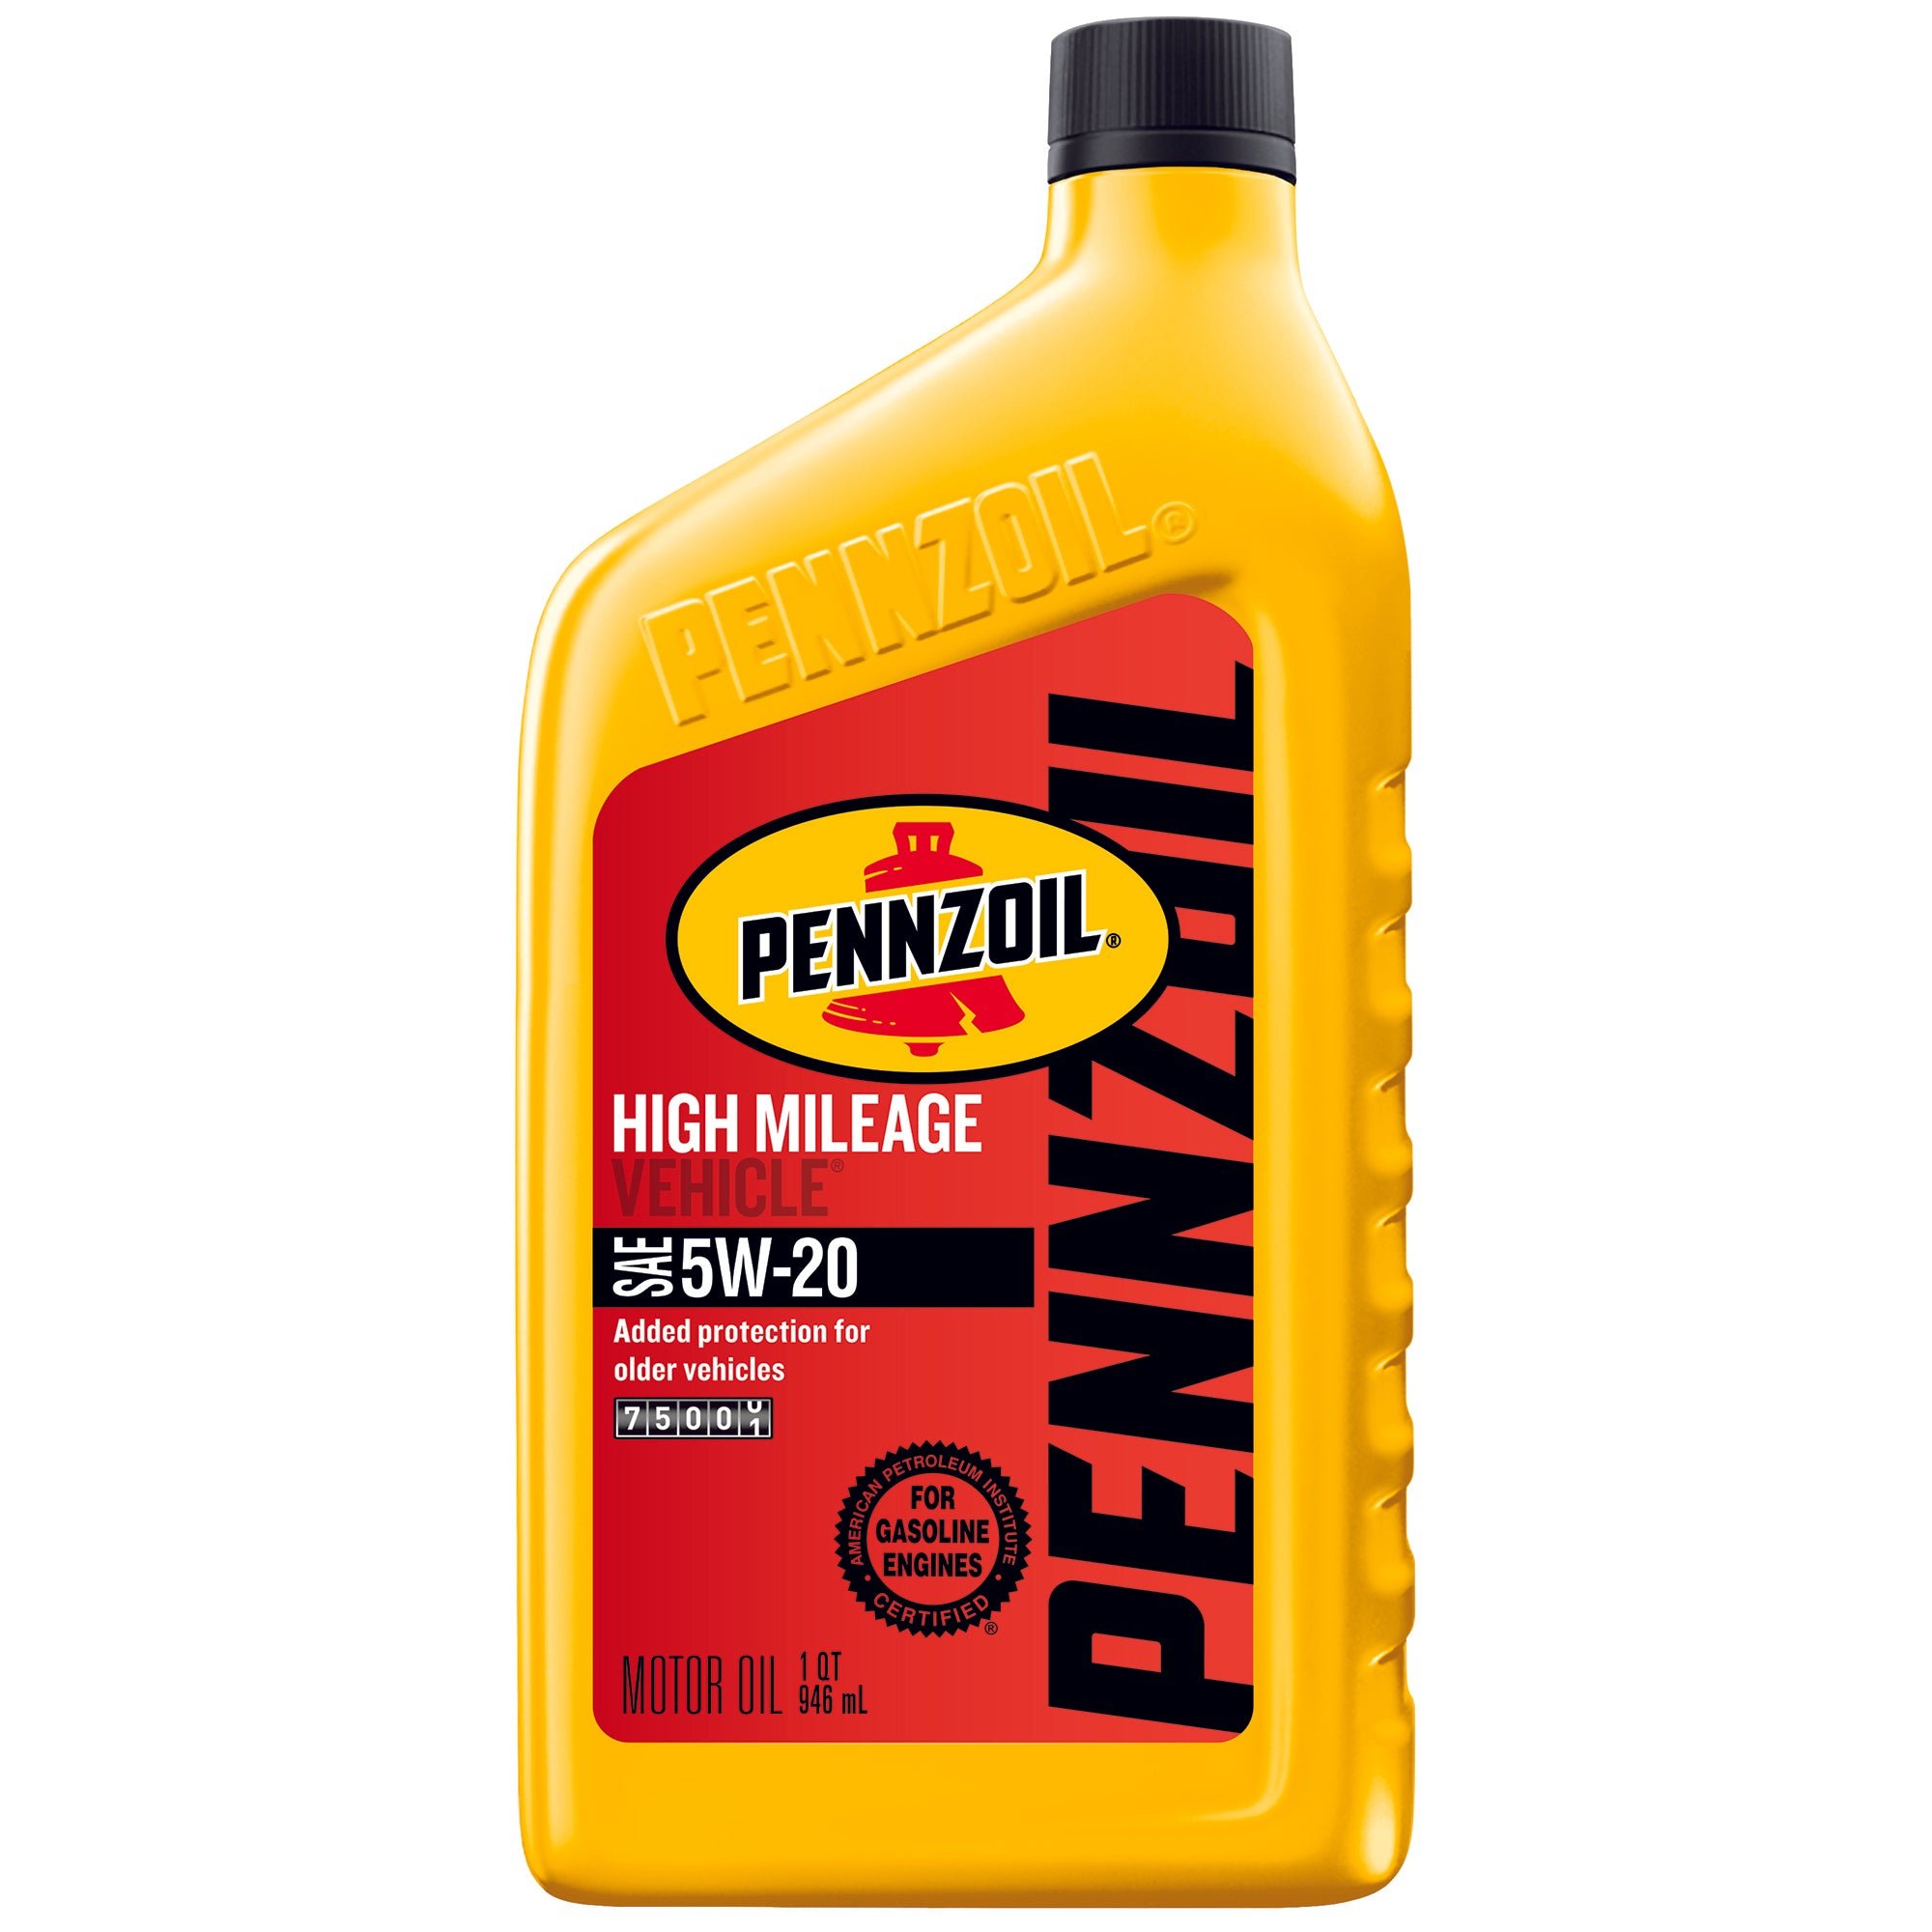 Pennzoil High Mileage Vehicle SAE 5W 20 Motor Oil Case of 6 1 qt